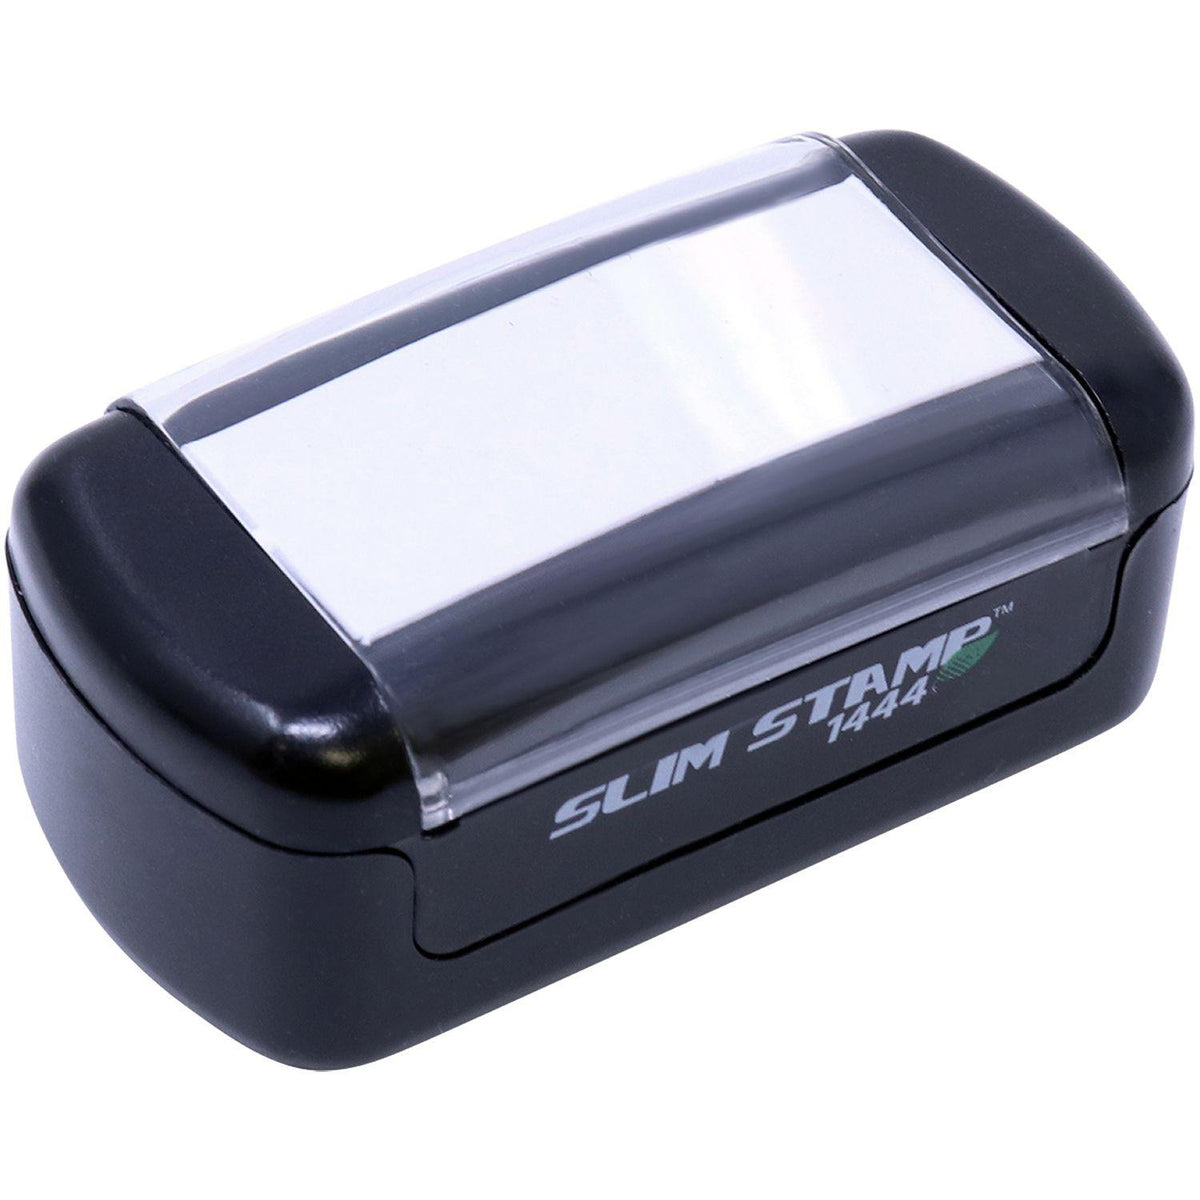 Slim Pre Inked Balanced Stamp - Engineer Seal Stamps - Brand_Slim, Impression Size_Small, Stamp Type_Pre-Inked Stamp, Type of Use_Finance